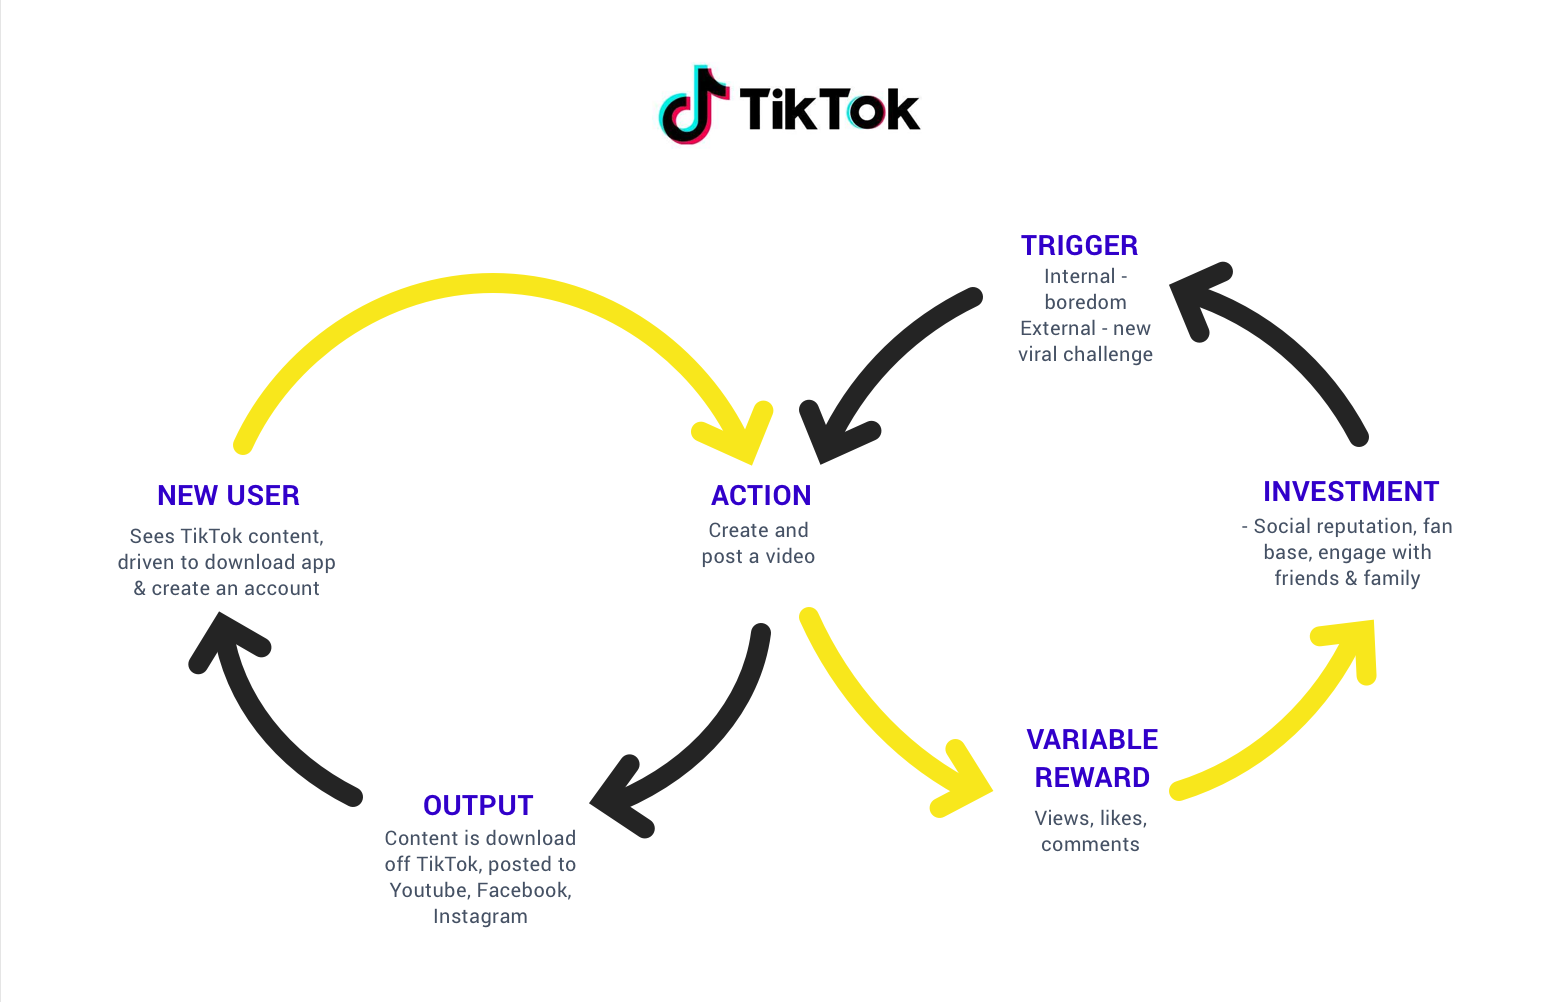 how TikTok uses both hook models & acquisition loops in their strategy